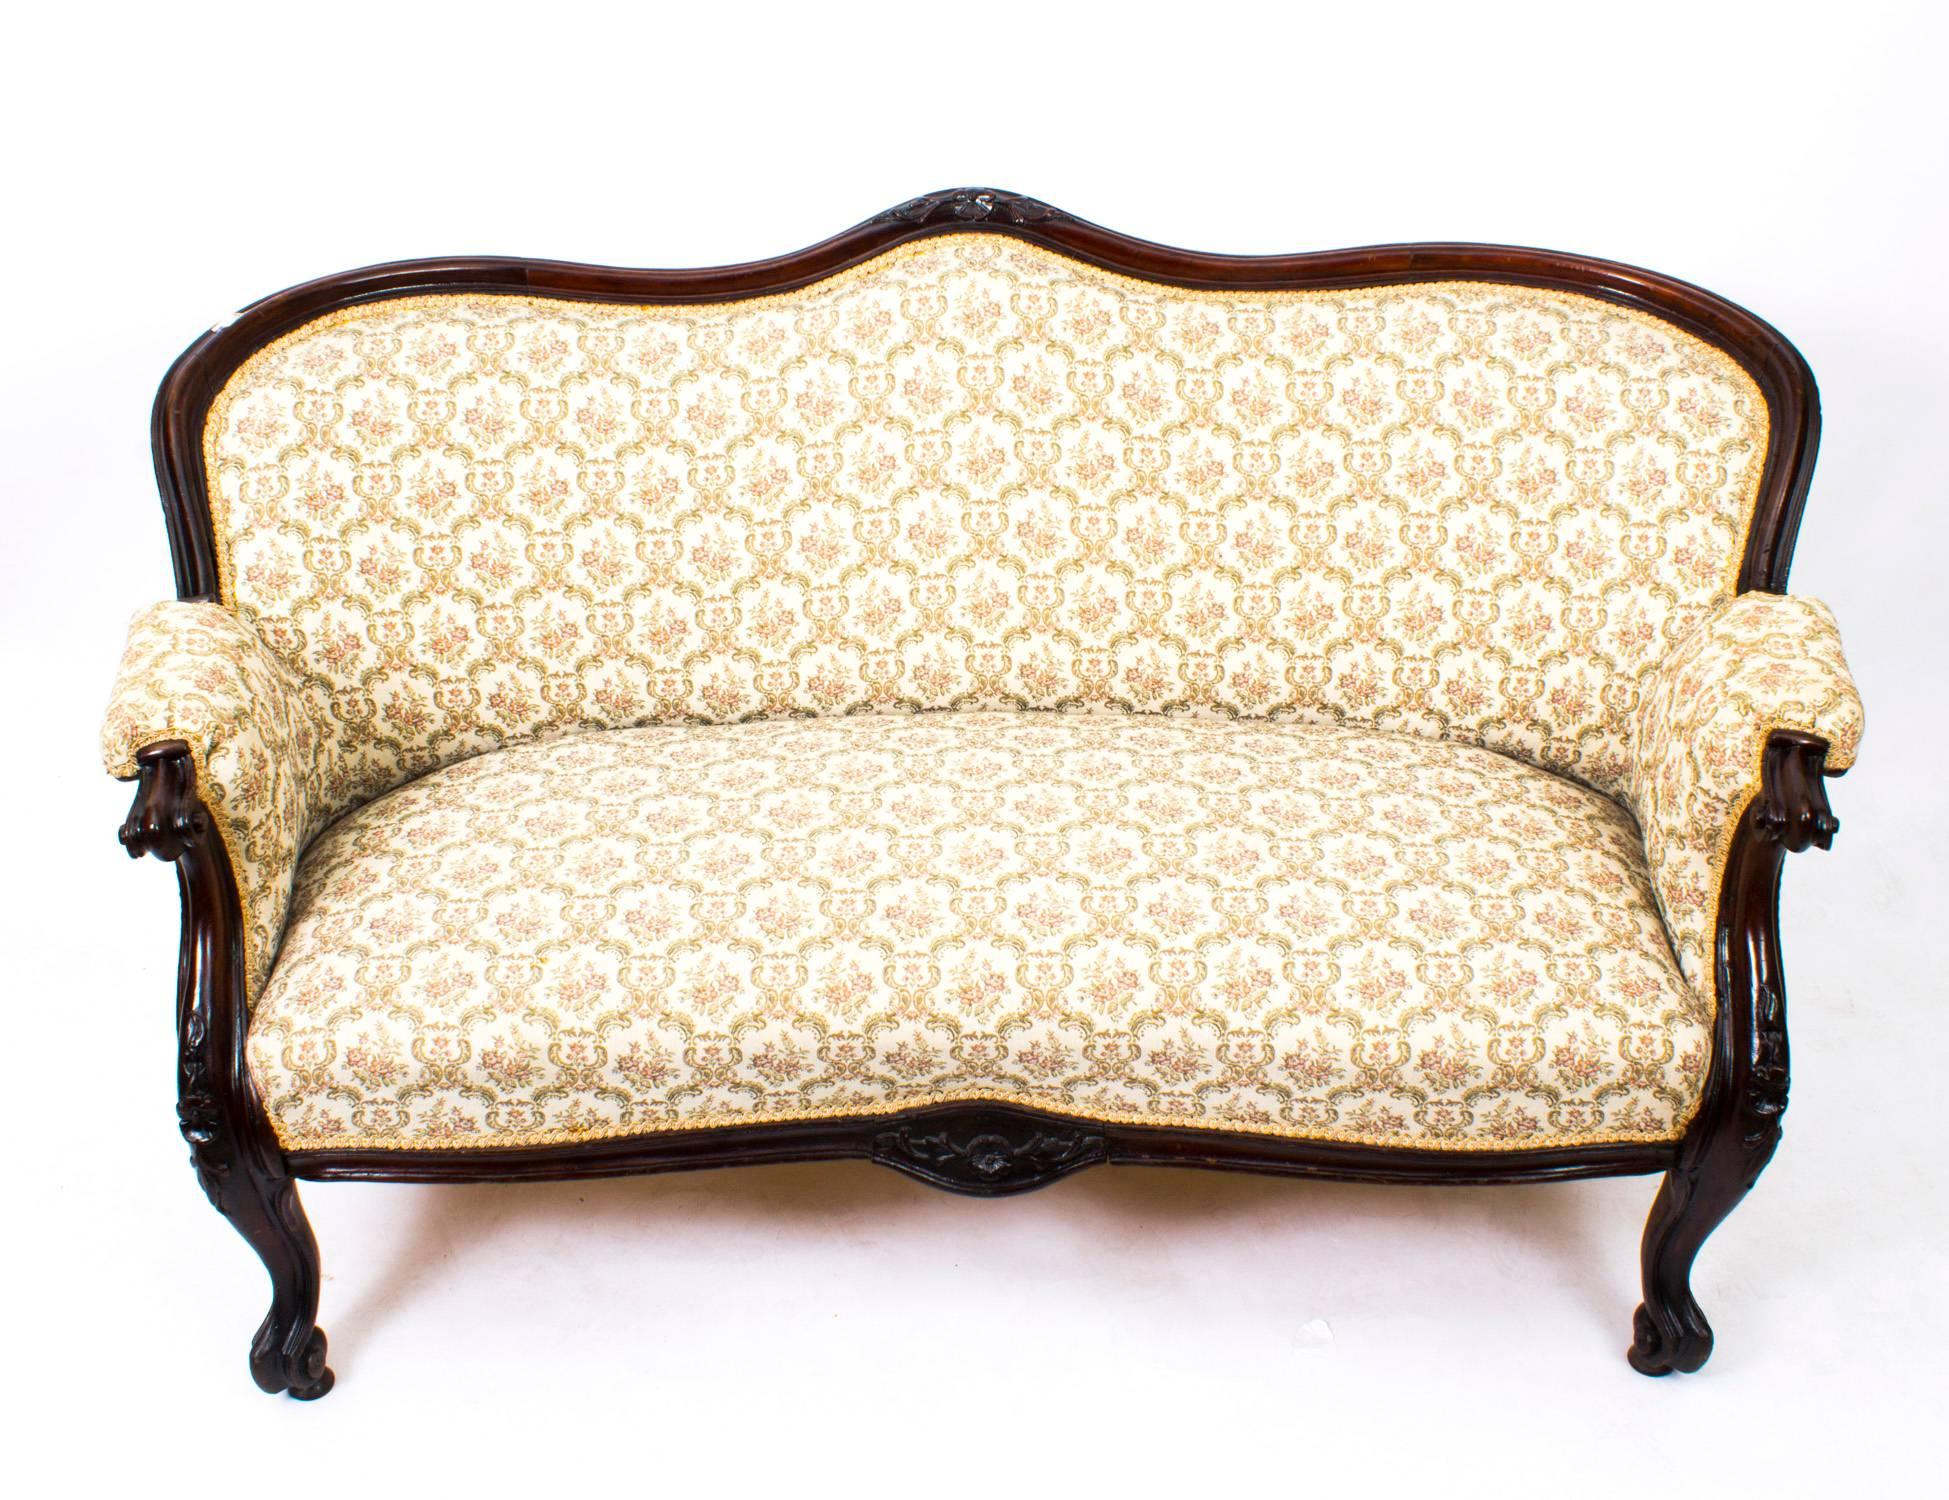 This is a stunning antique Victorian mahogany two-seat settee, circa 1870 in date.

The sofa has been hand-carved in mahogany and has a serpentine back, scrolled arms and cabriole forelegs.

It is luxuriously upholstered in a fine cream patterned